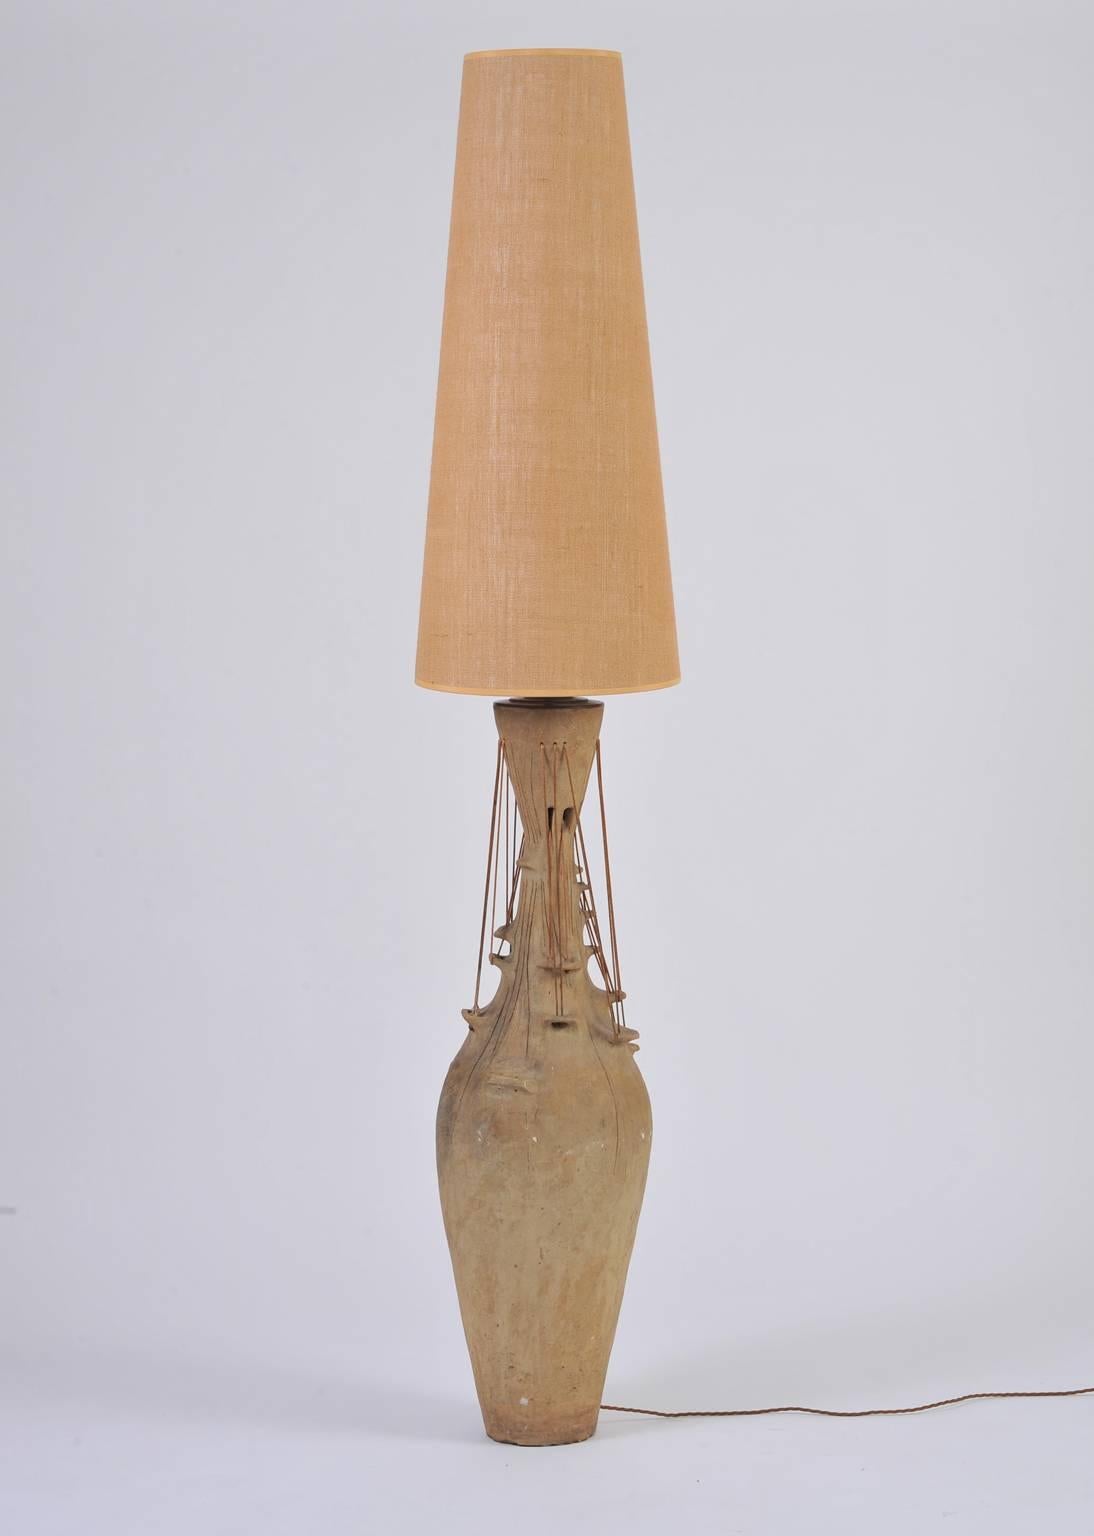 A monumental and unique studio pottery lamp, the imposing terracotta urn shaped base incorporating patinated ropes, supporting a large conical hessian shade,
England, circa 1960.